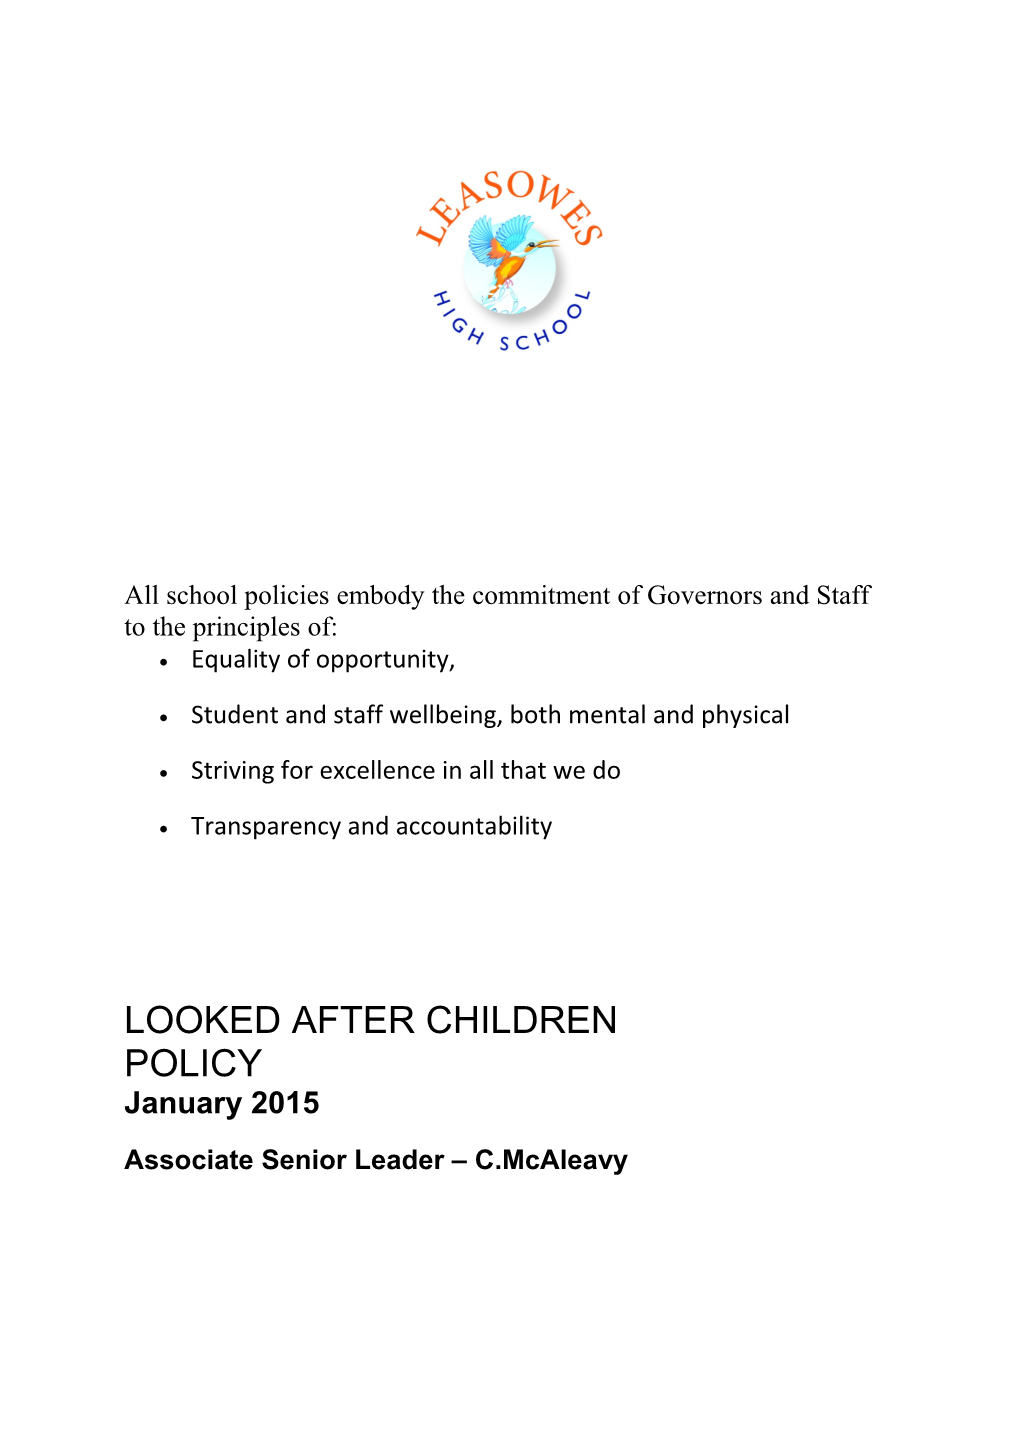 All School Policies Embody the Commitment of Governors and Staff to the Principles Of